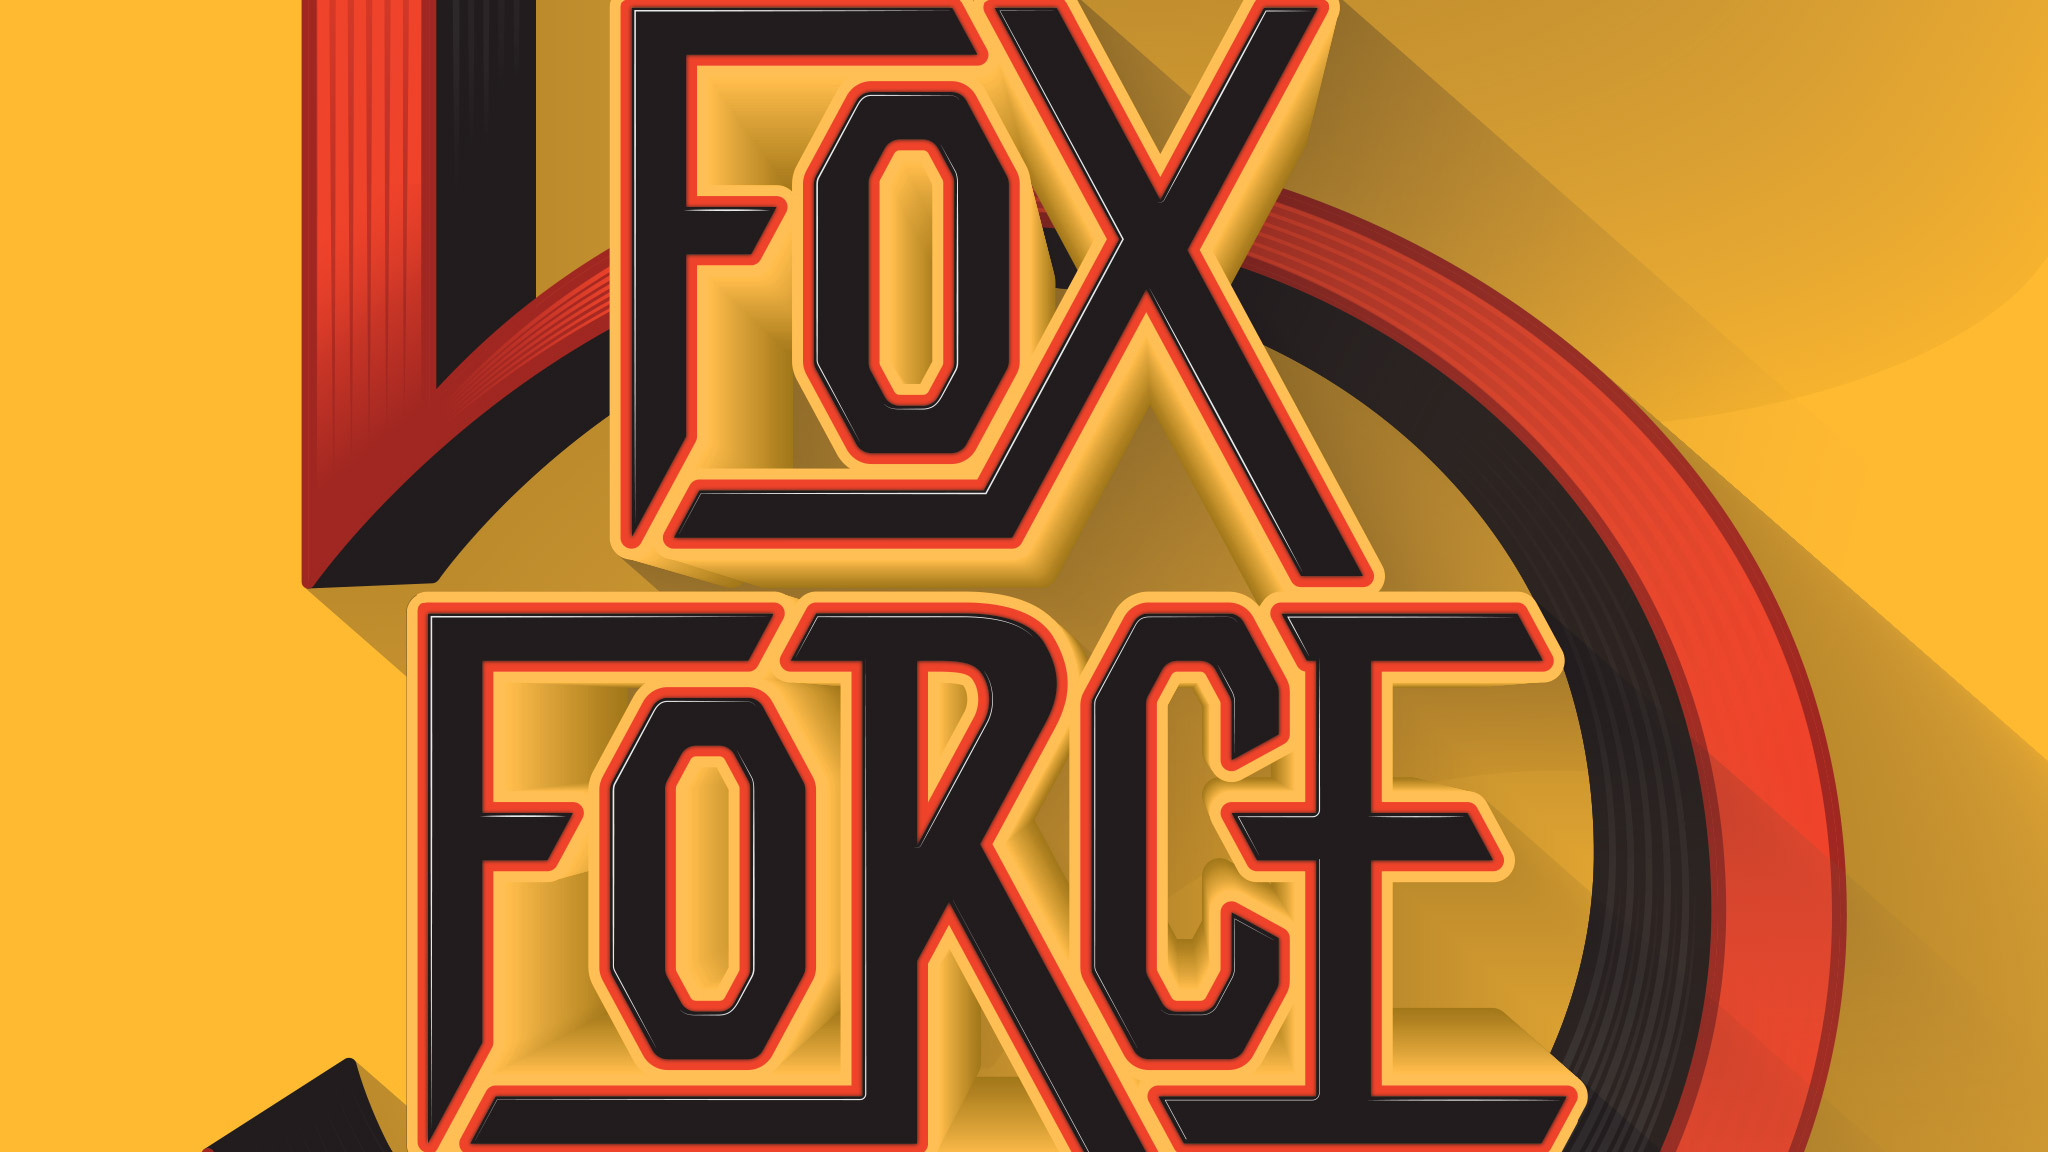 Pulp Fiction Fox Force 5 Lettering Zoom